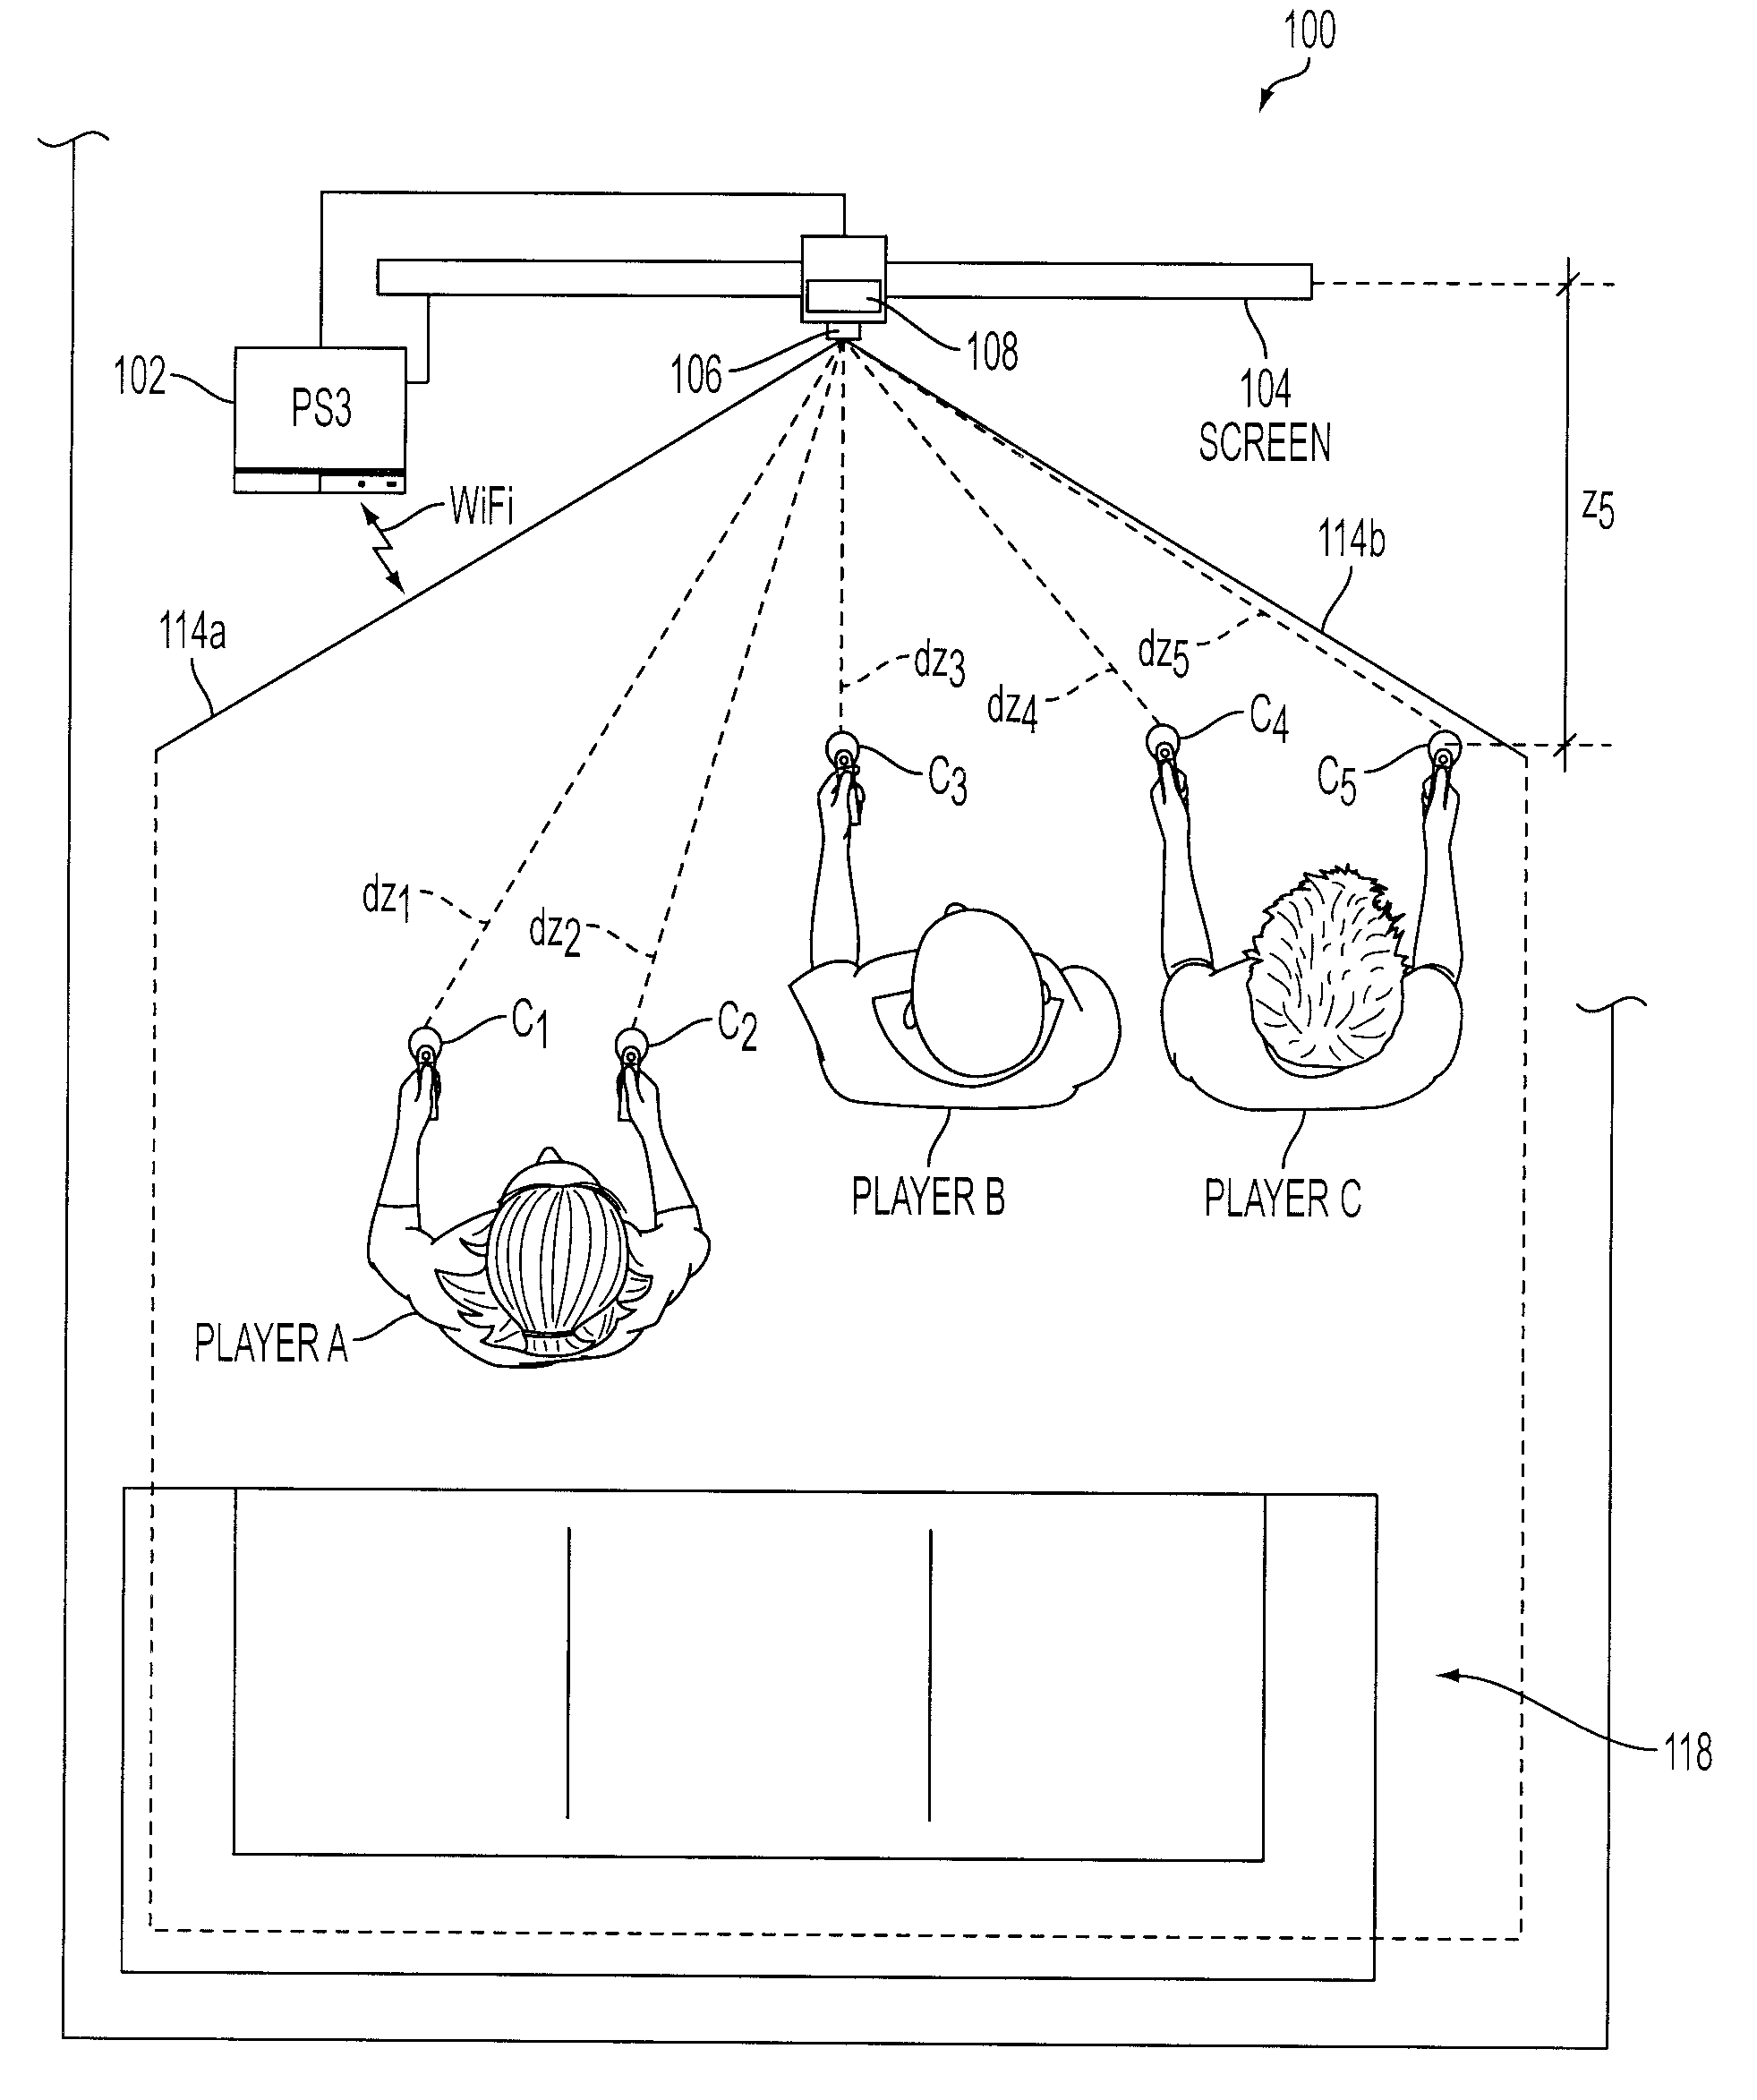 Determination of controller three-dimensional location using image analysis and ultrasonic communication